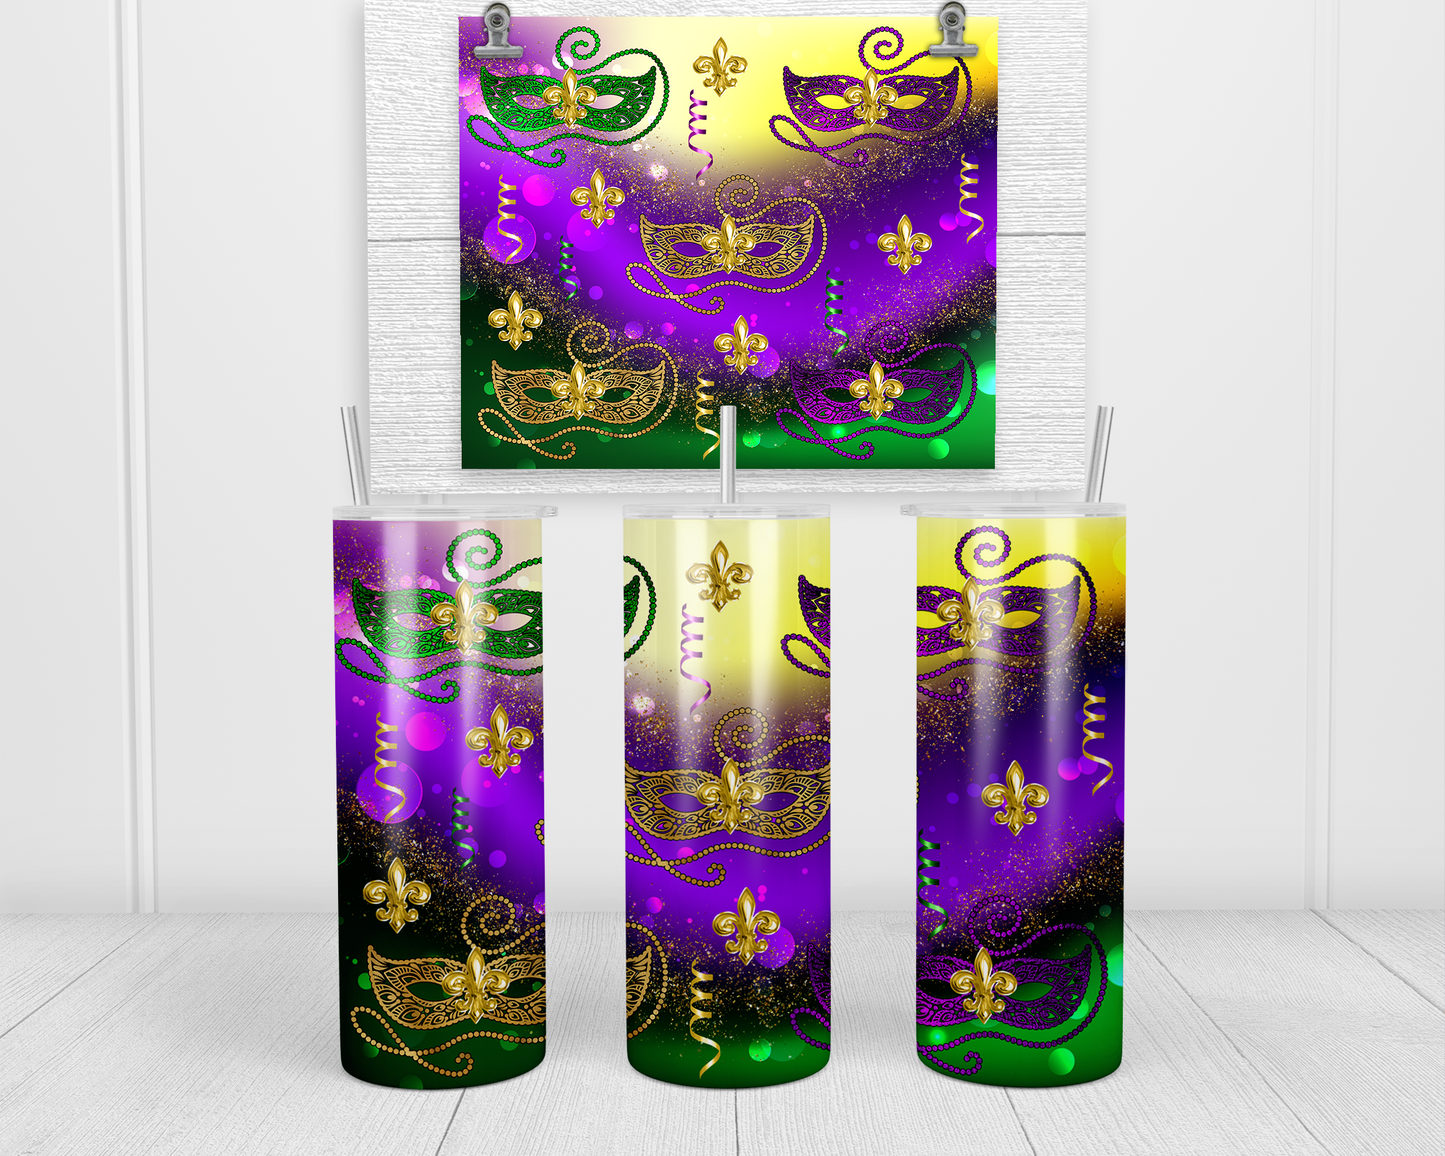 Celebrate Mardi Gras in style with this 20 oz tumbler, surrounded by vibrant Mardi Gras masks. Perfect for keeping your beverages hot or cold, it embodies the festive and colorful spirit of the carnival season